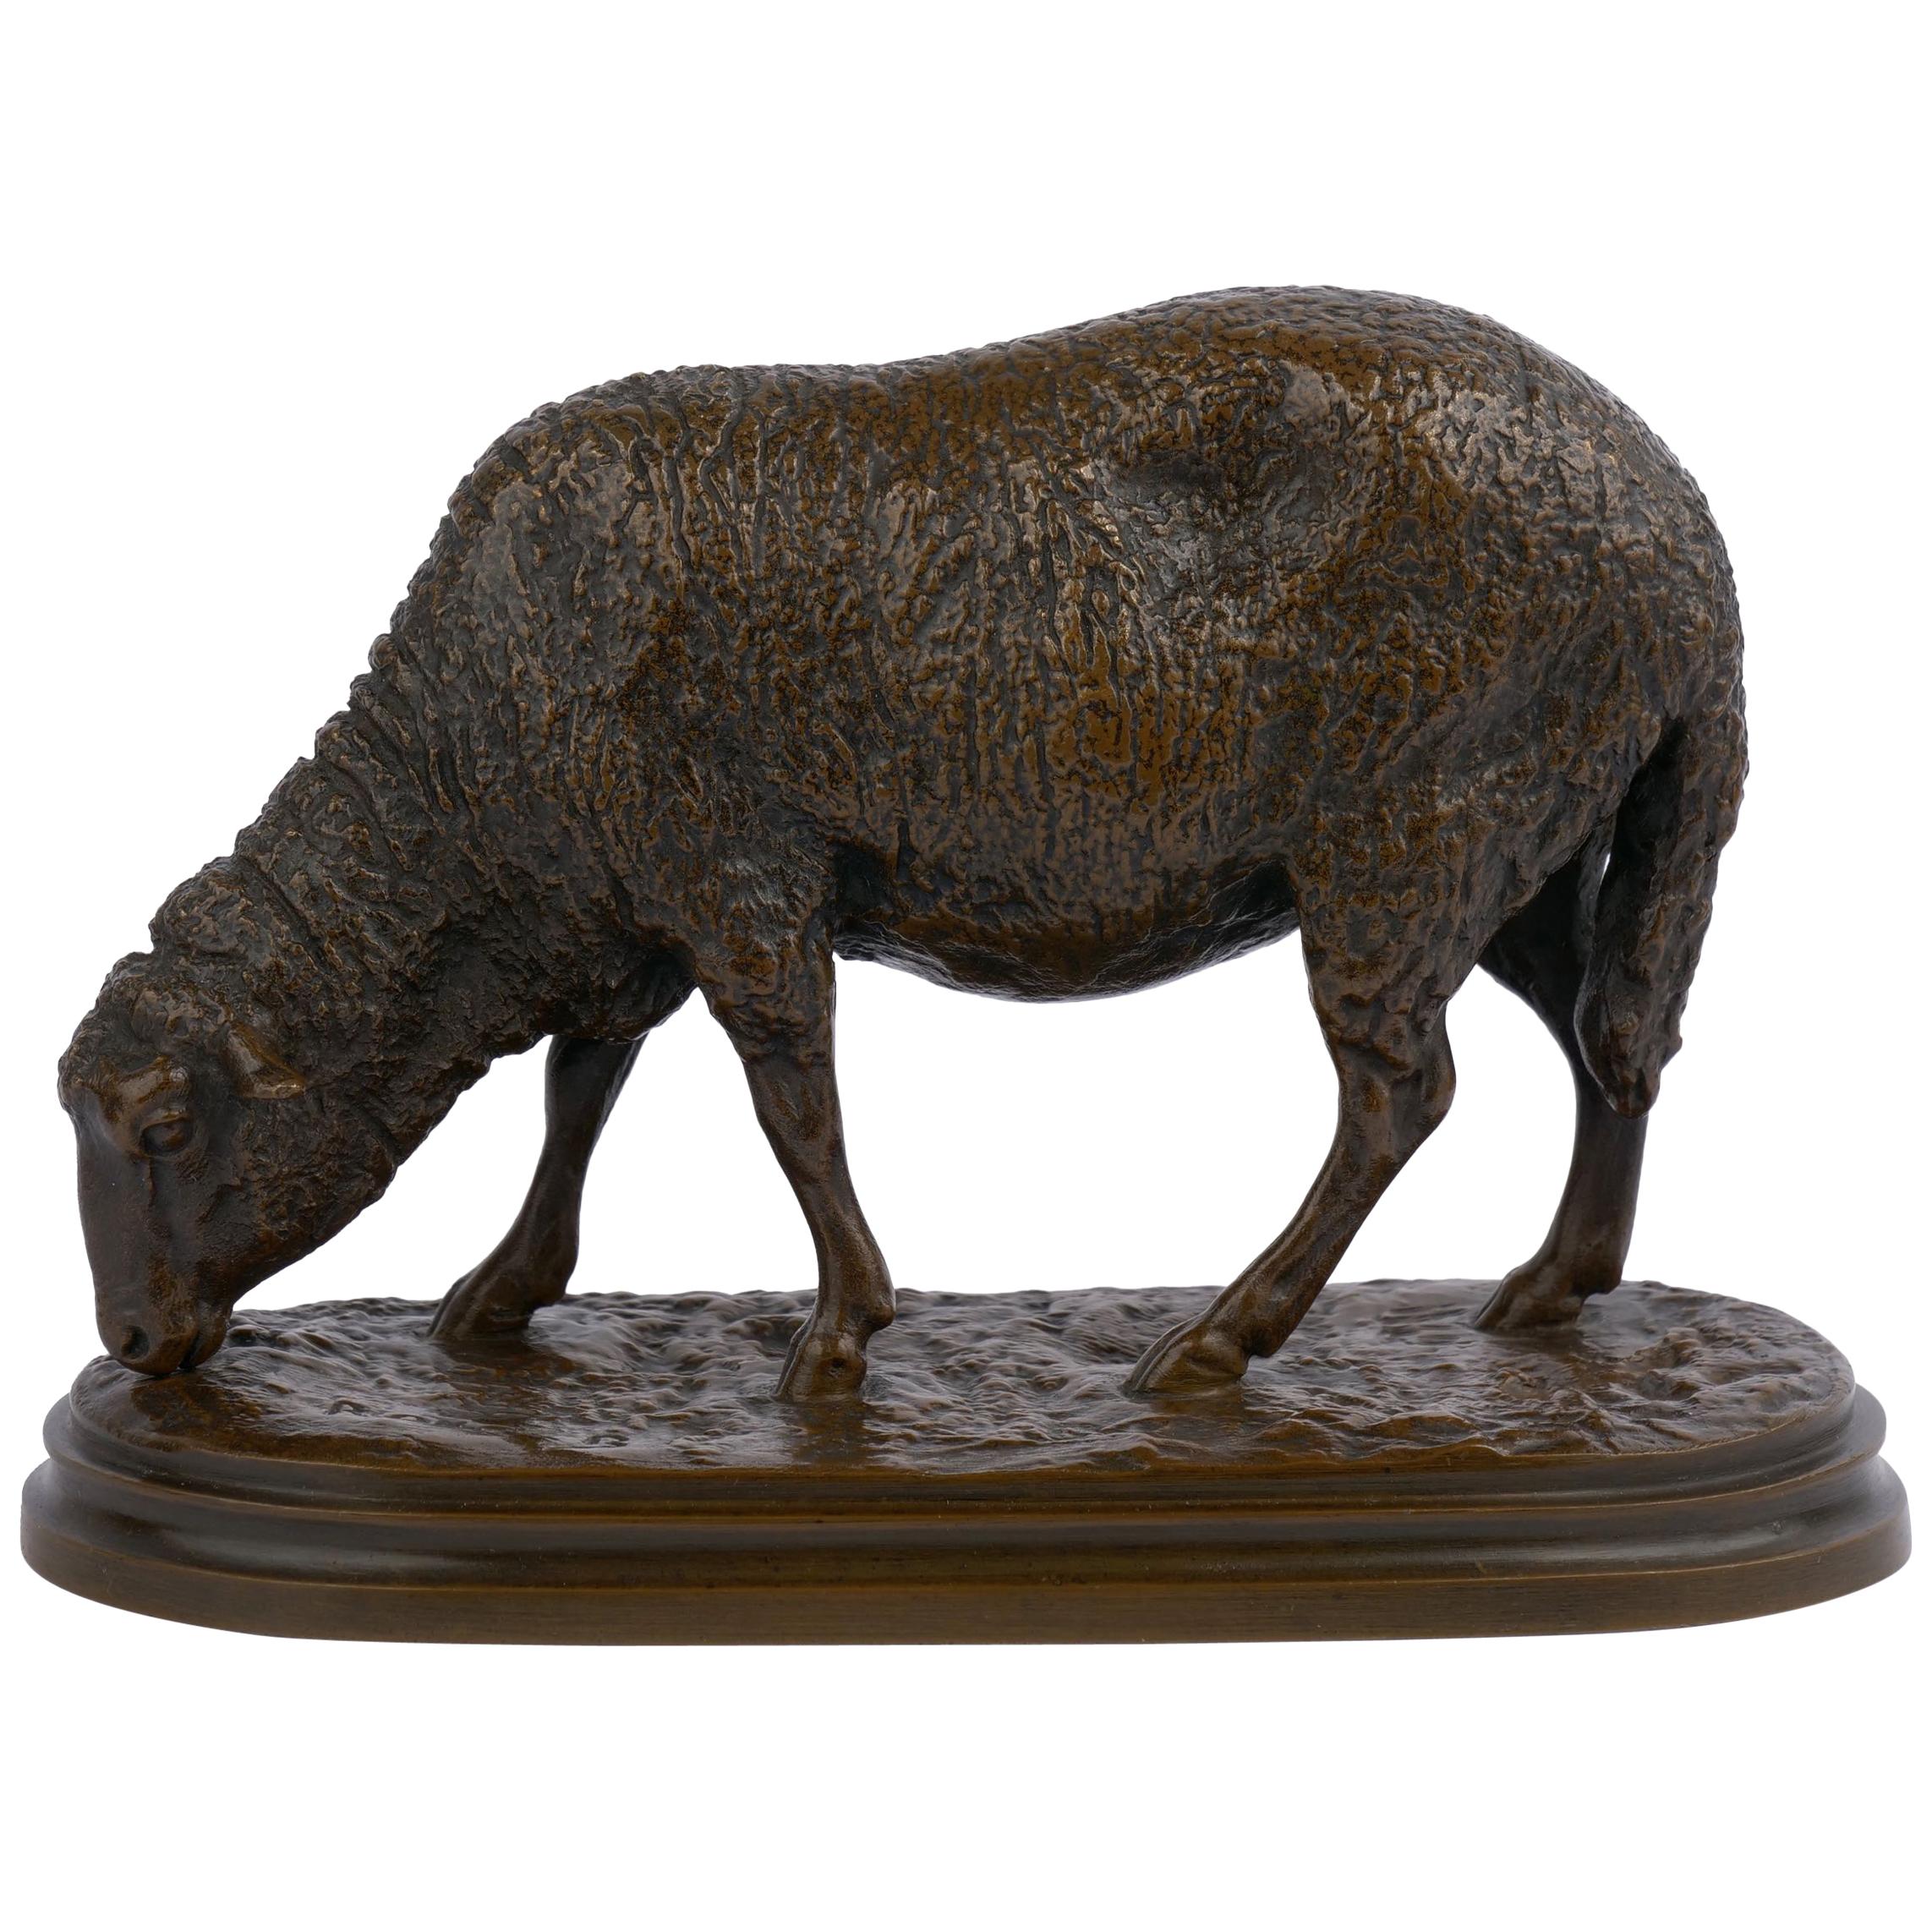 Antique French Bronze Sculpture of Sheep by Rosa Bonheur, 19th Century